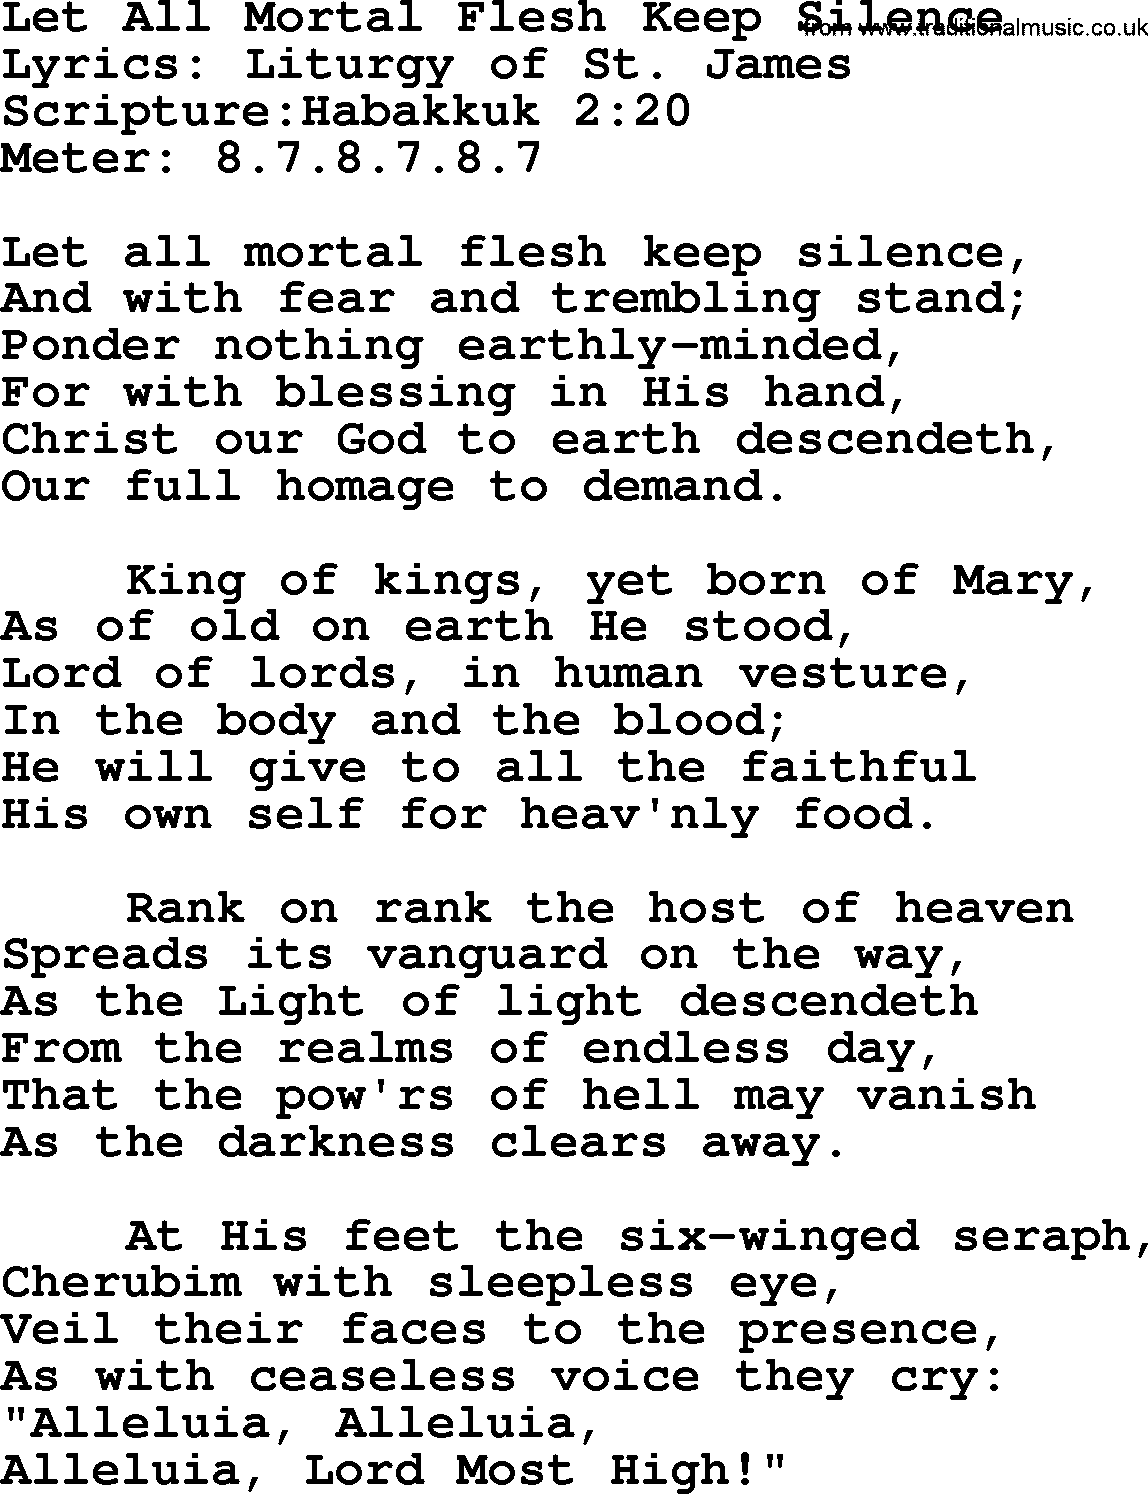 A collection of 500+ most sung Christian church hymns and songs, title: Let All Mortal Flesh Keep Silence, lyrics, PPTX and PDF